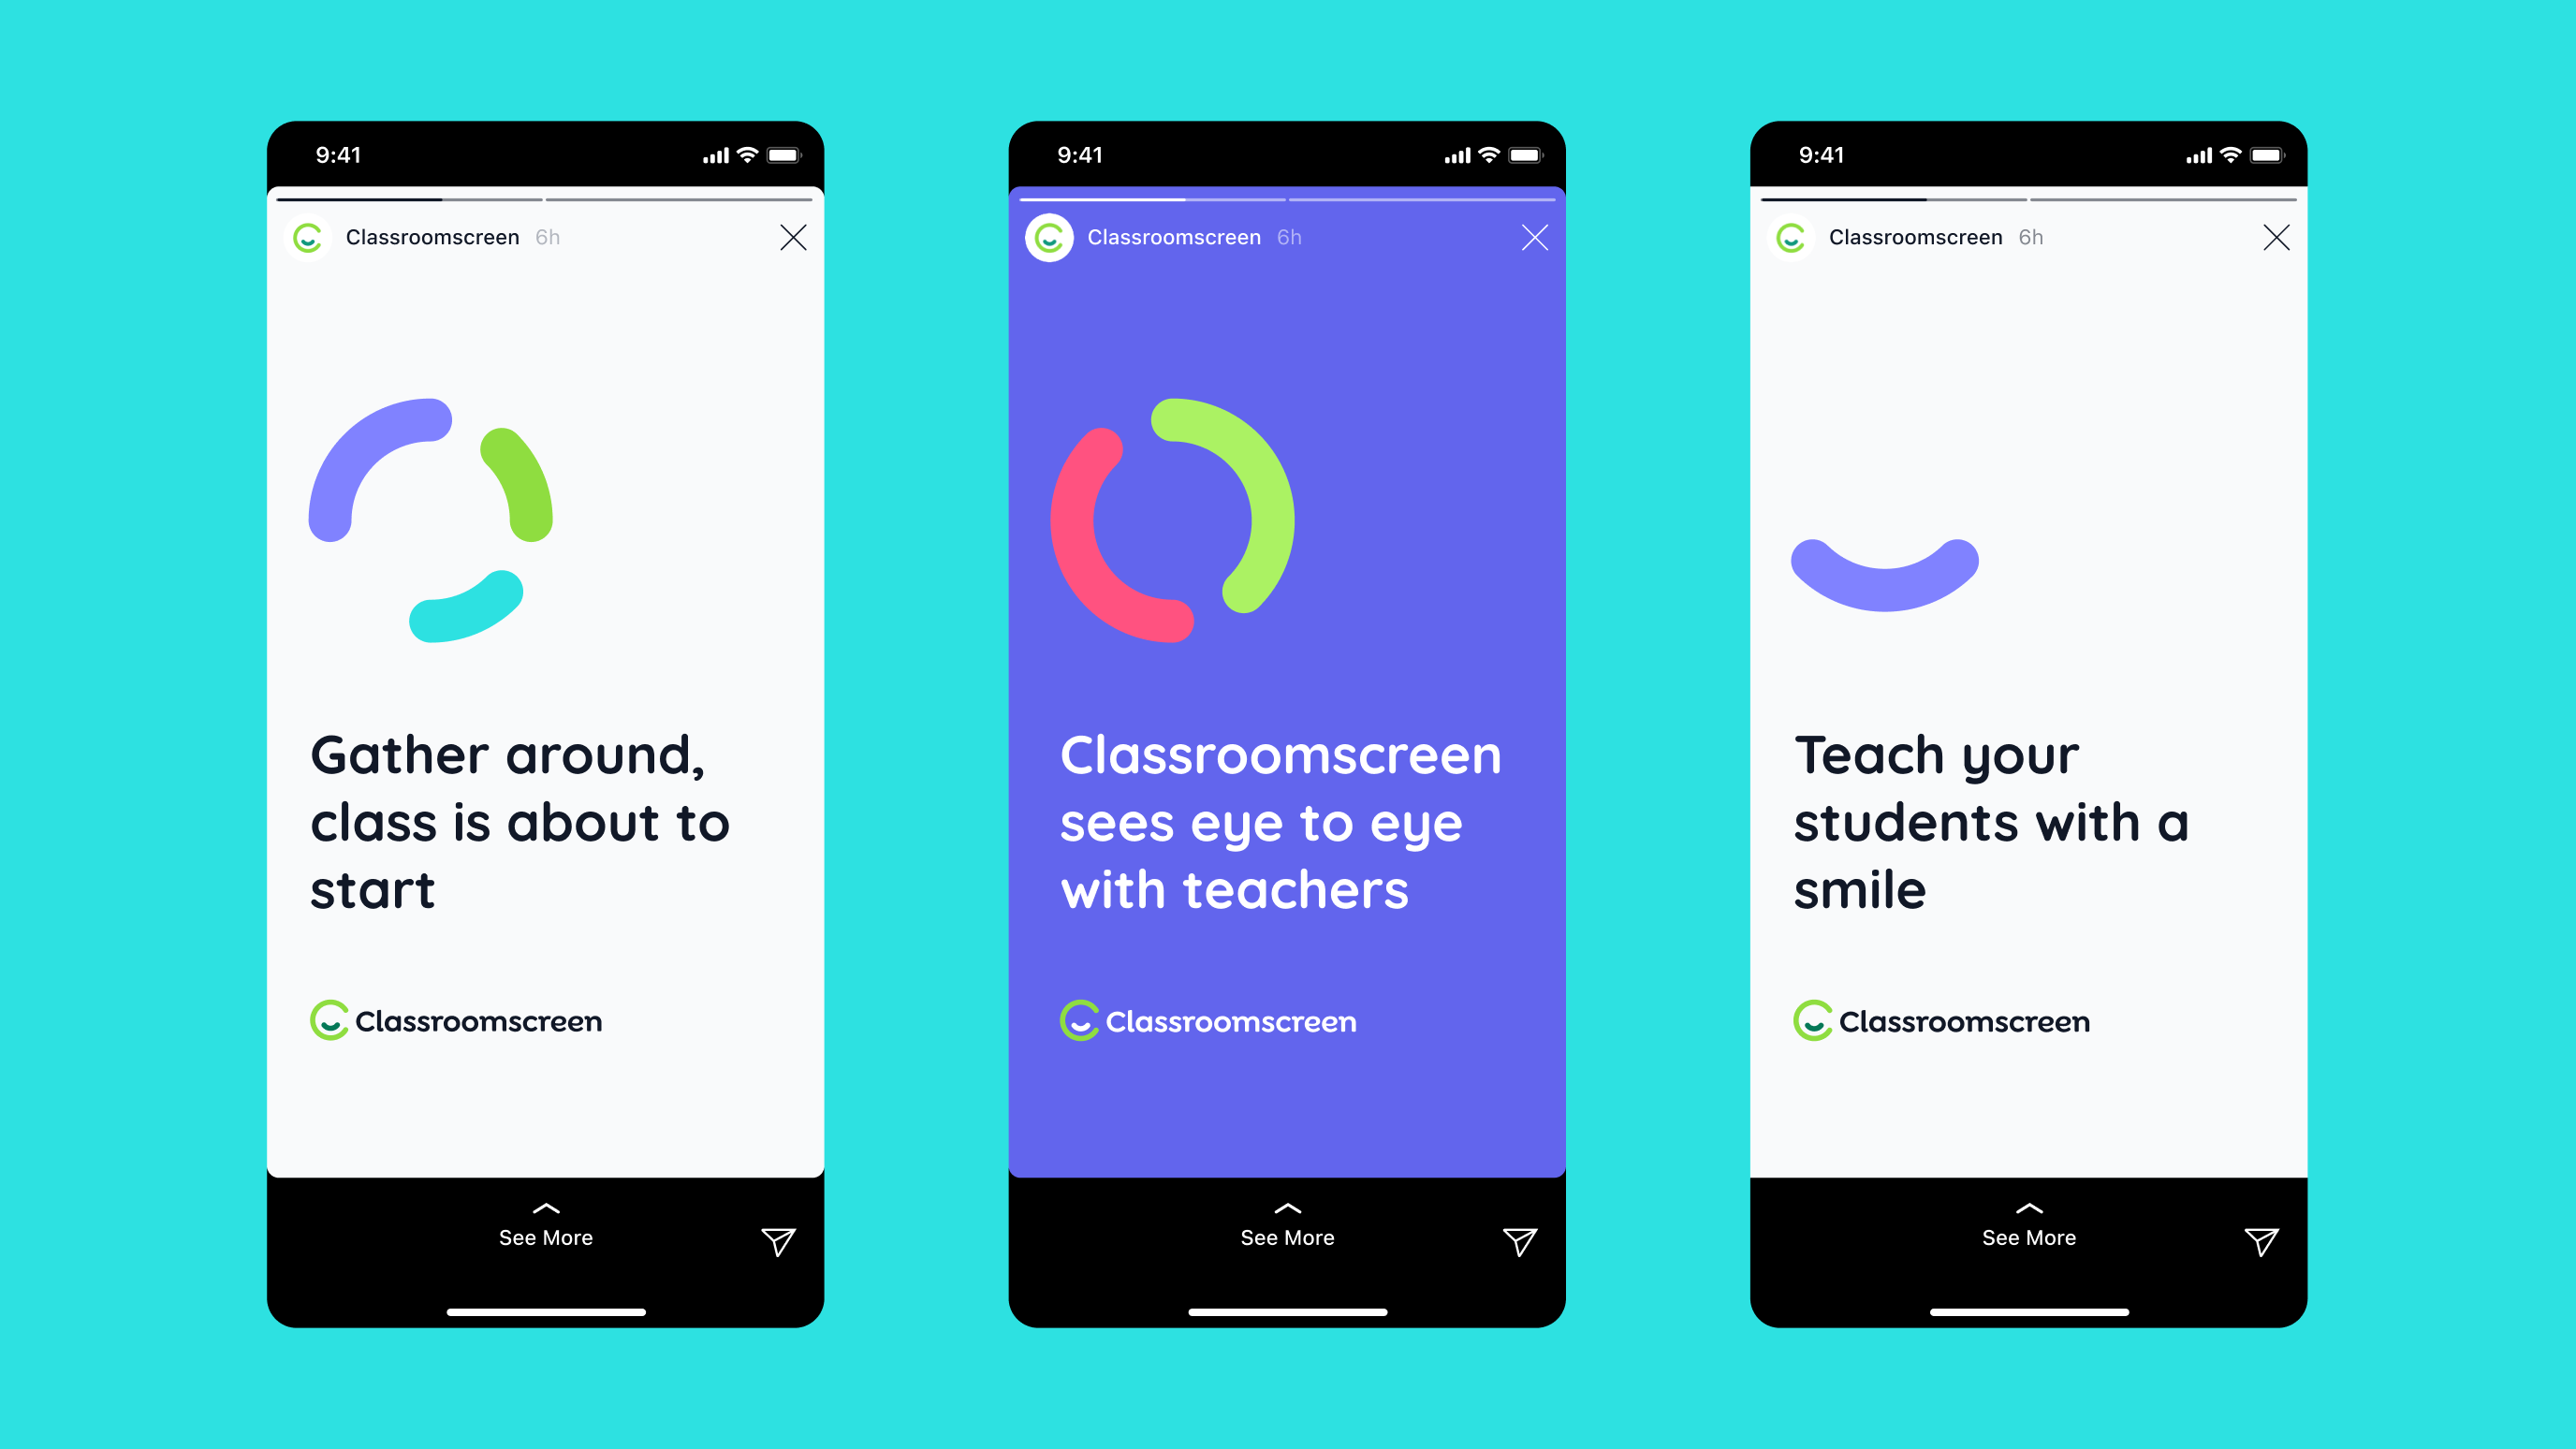 three mobile phone shaped images that each show an Instagram story-like interface with a social post design for Classroomscreen